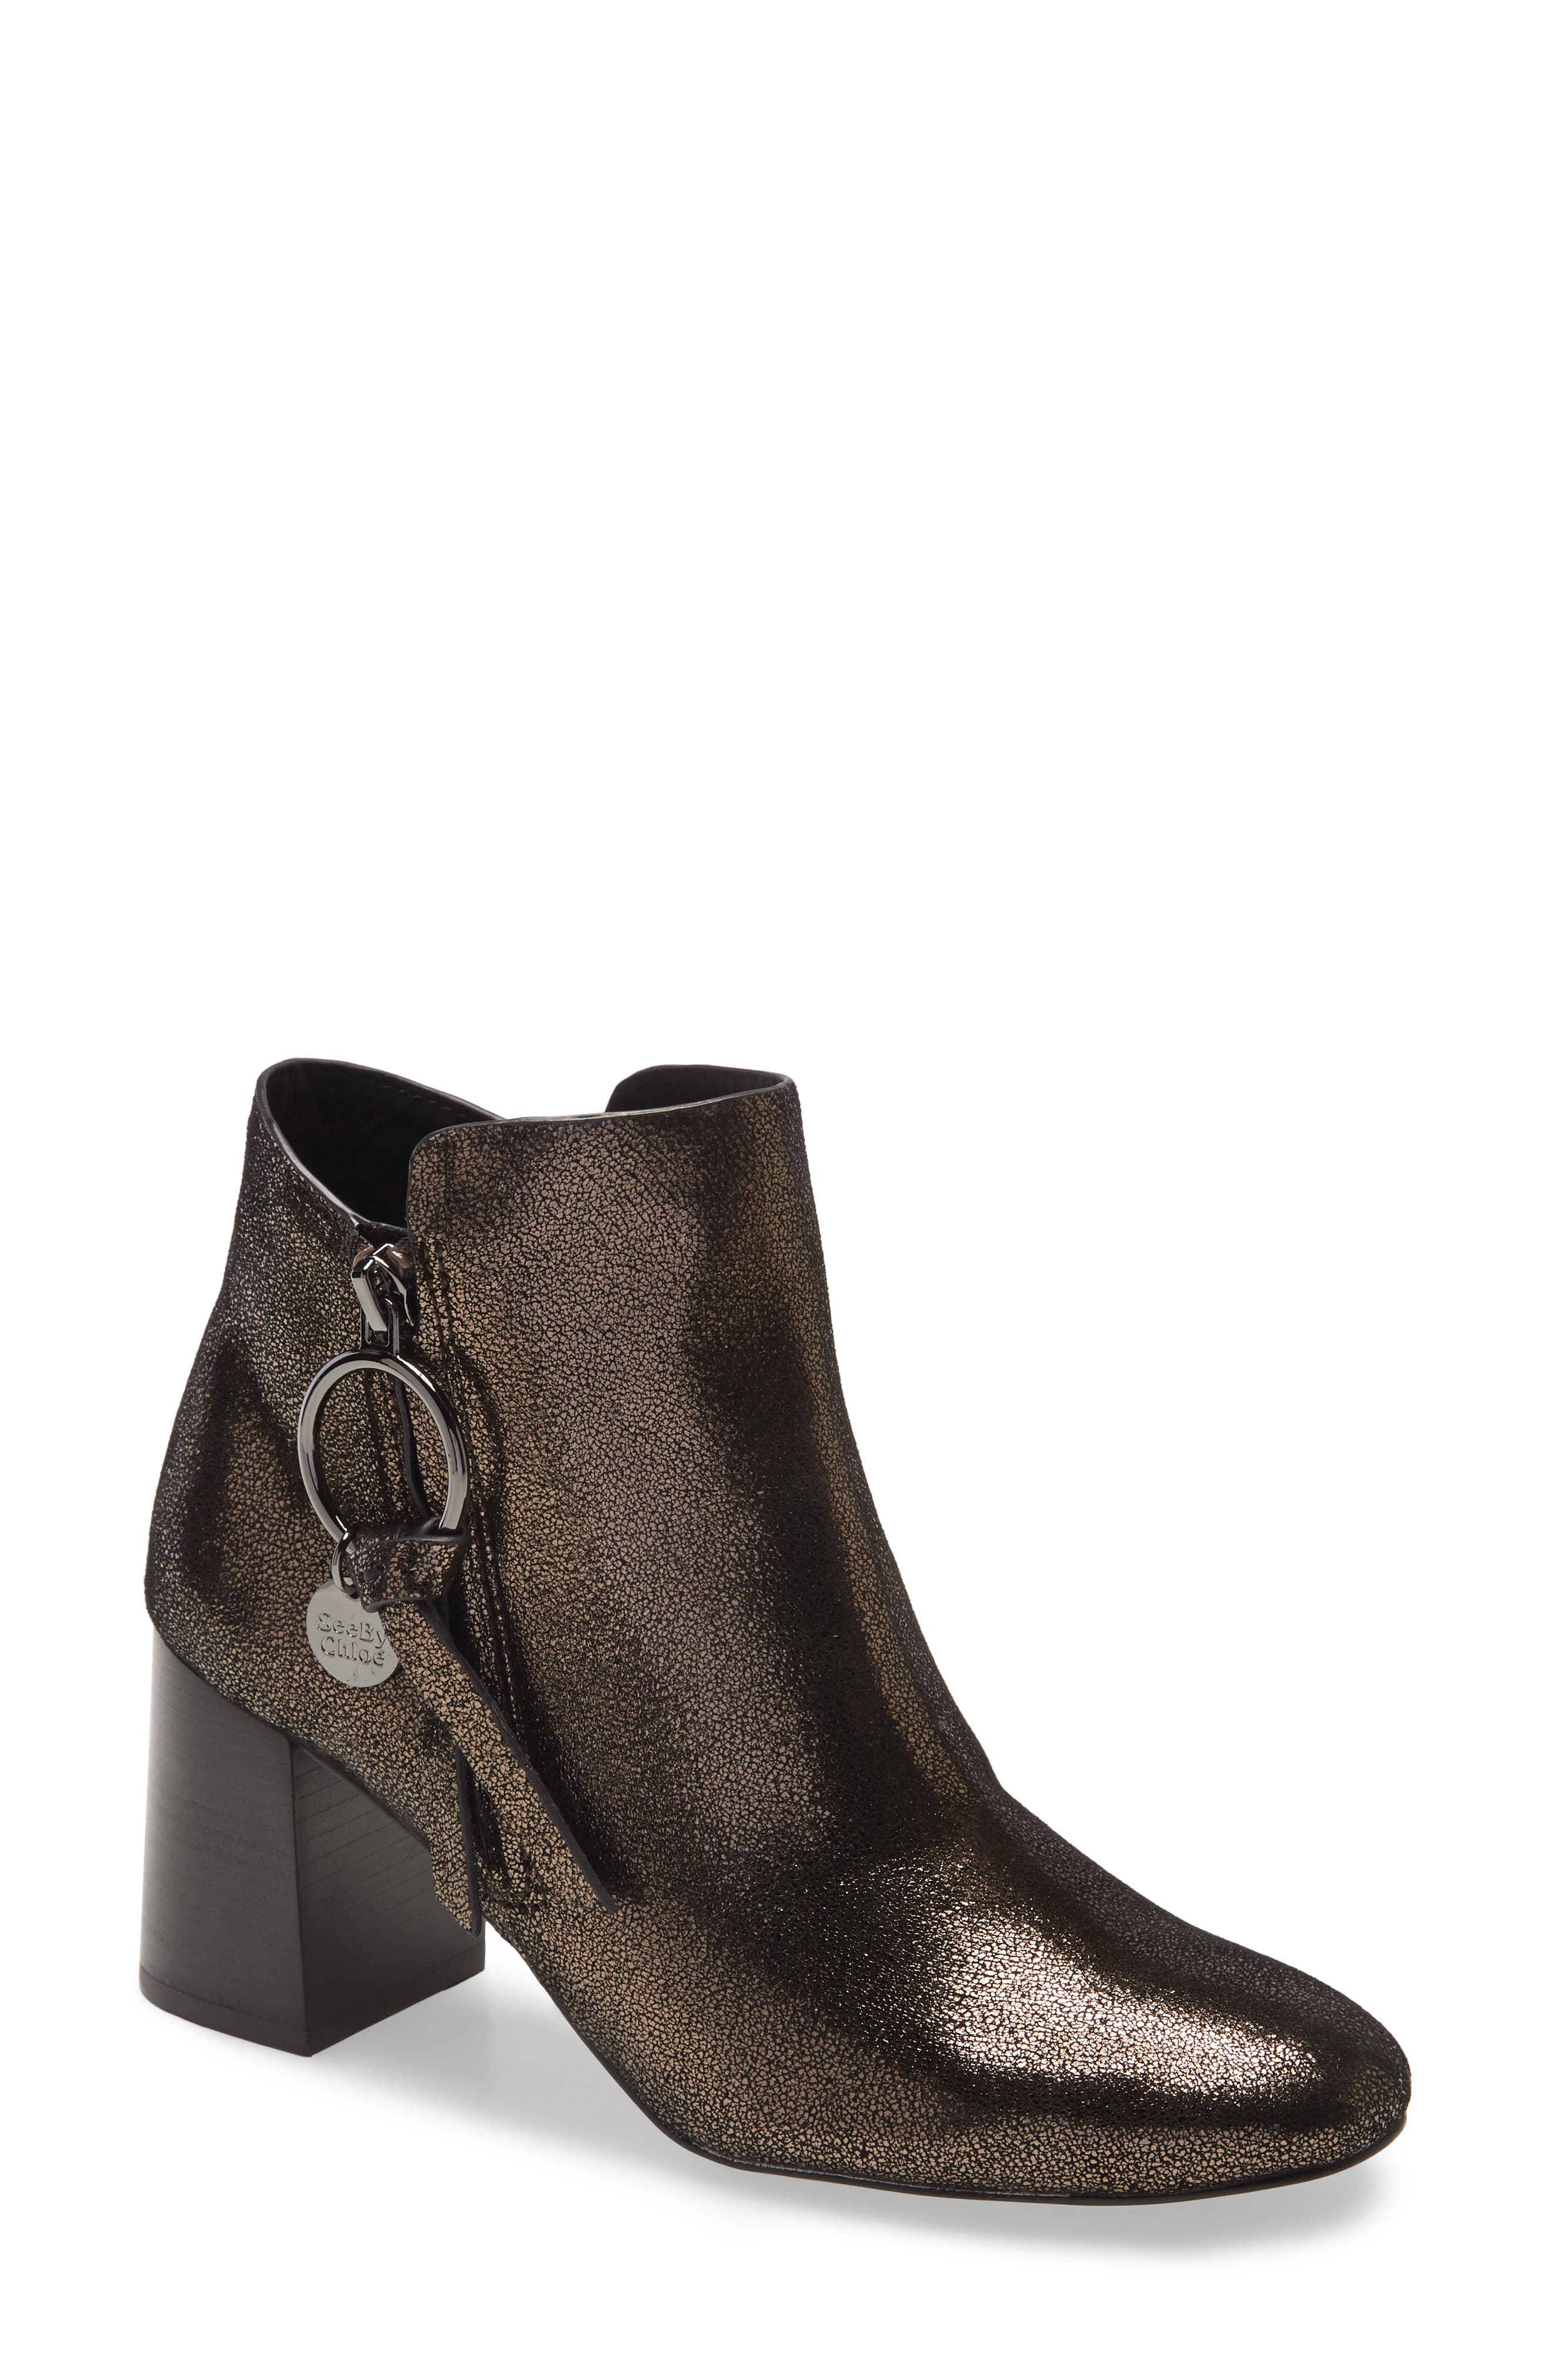 SEE BY CHLOÉ LOUISE BOOTIE,8051404763413